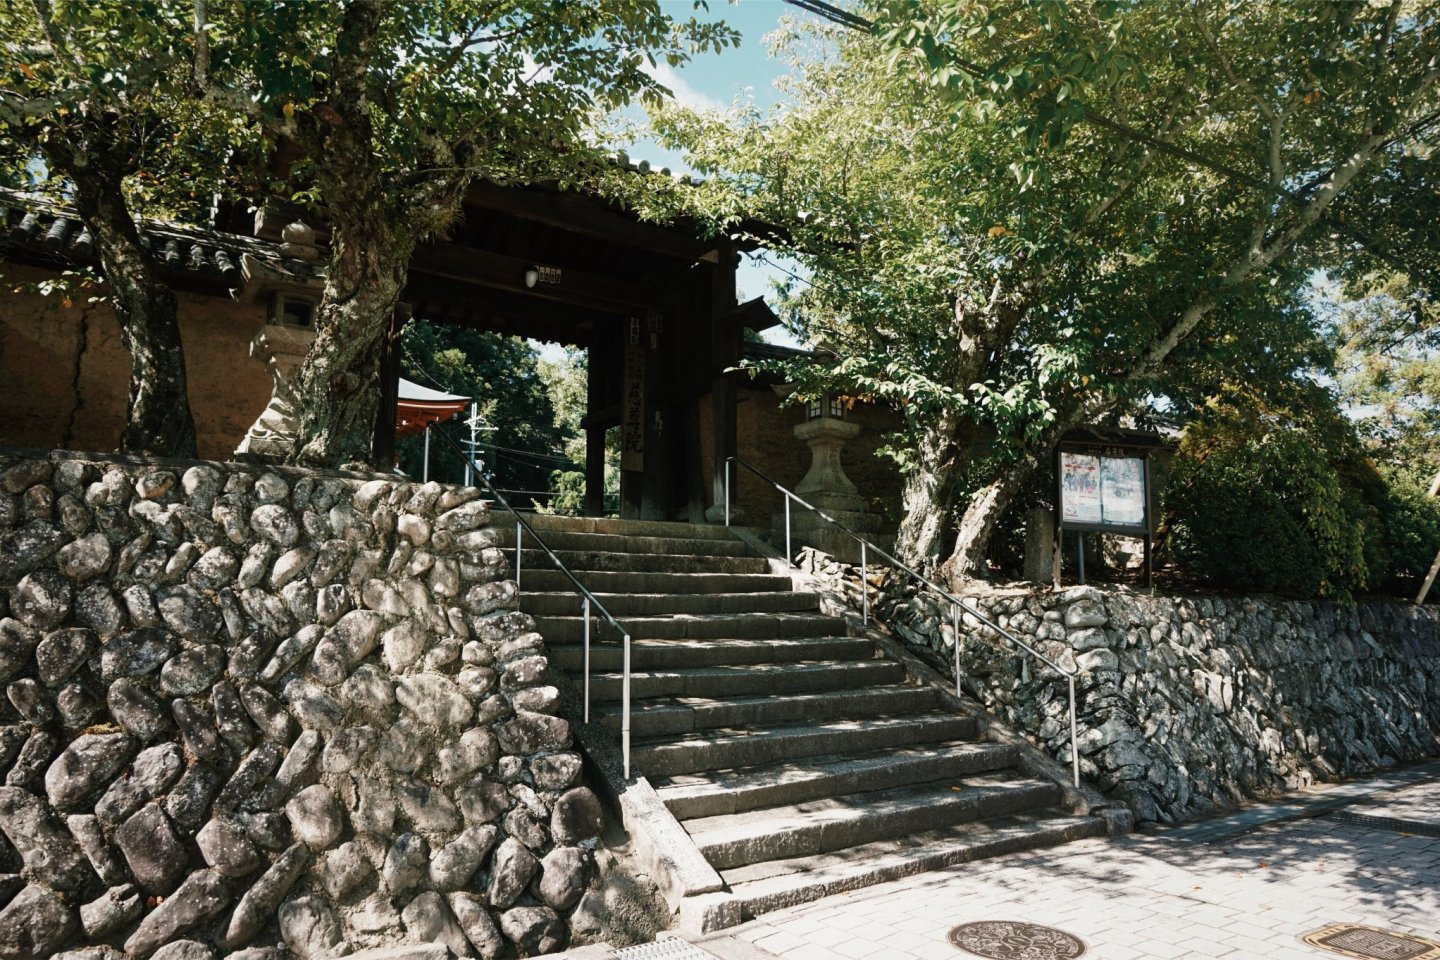 The entrance to Jisonin Temple